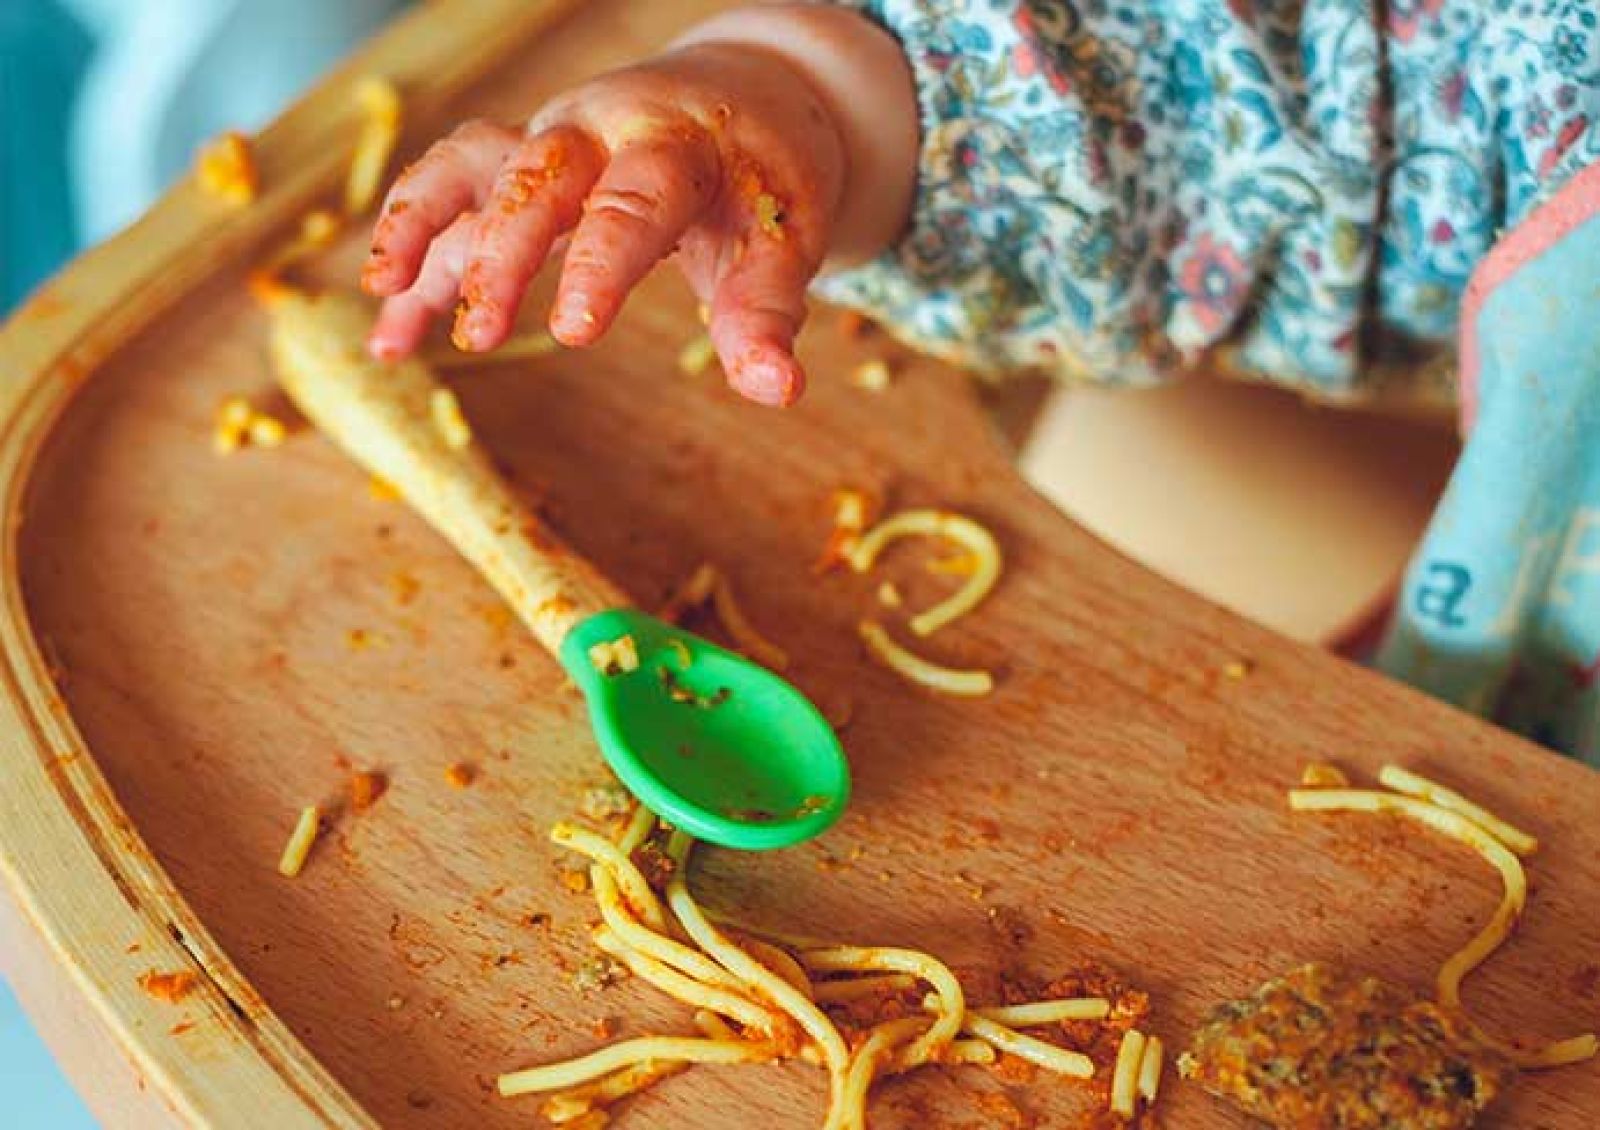 child's hand reaching for a spoon on a plate that is dirty with spaghetti